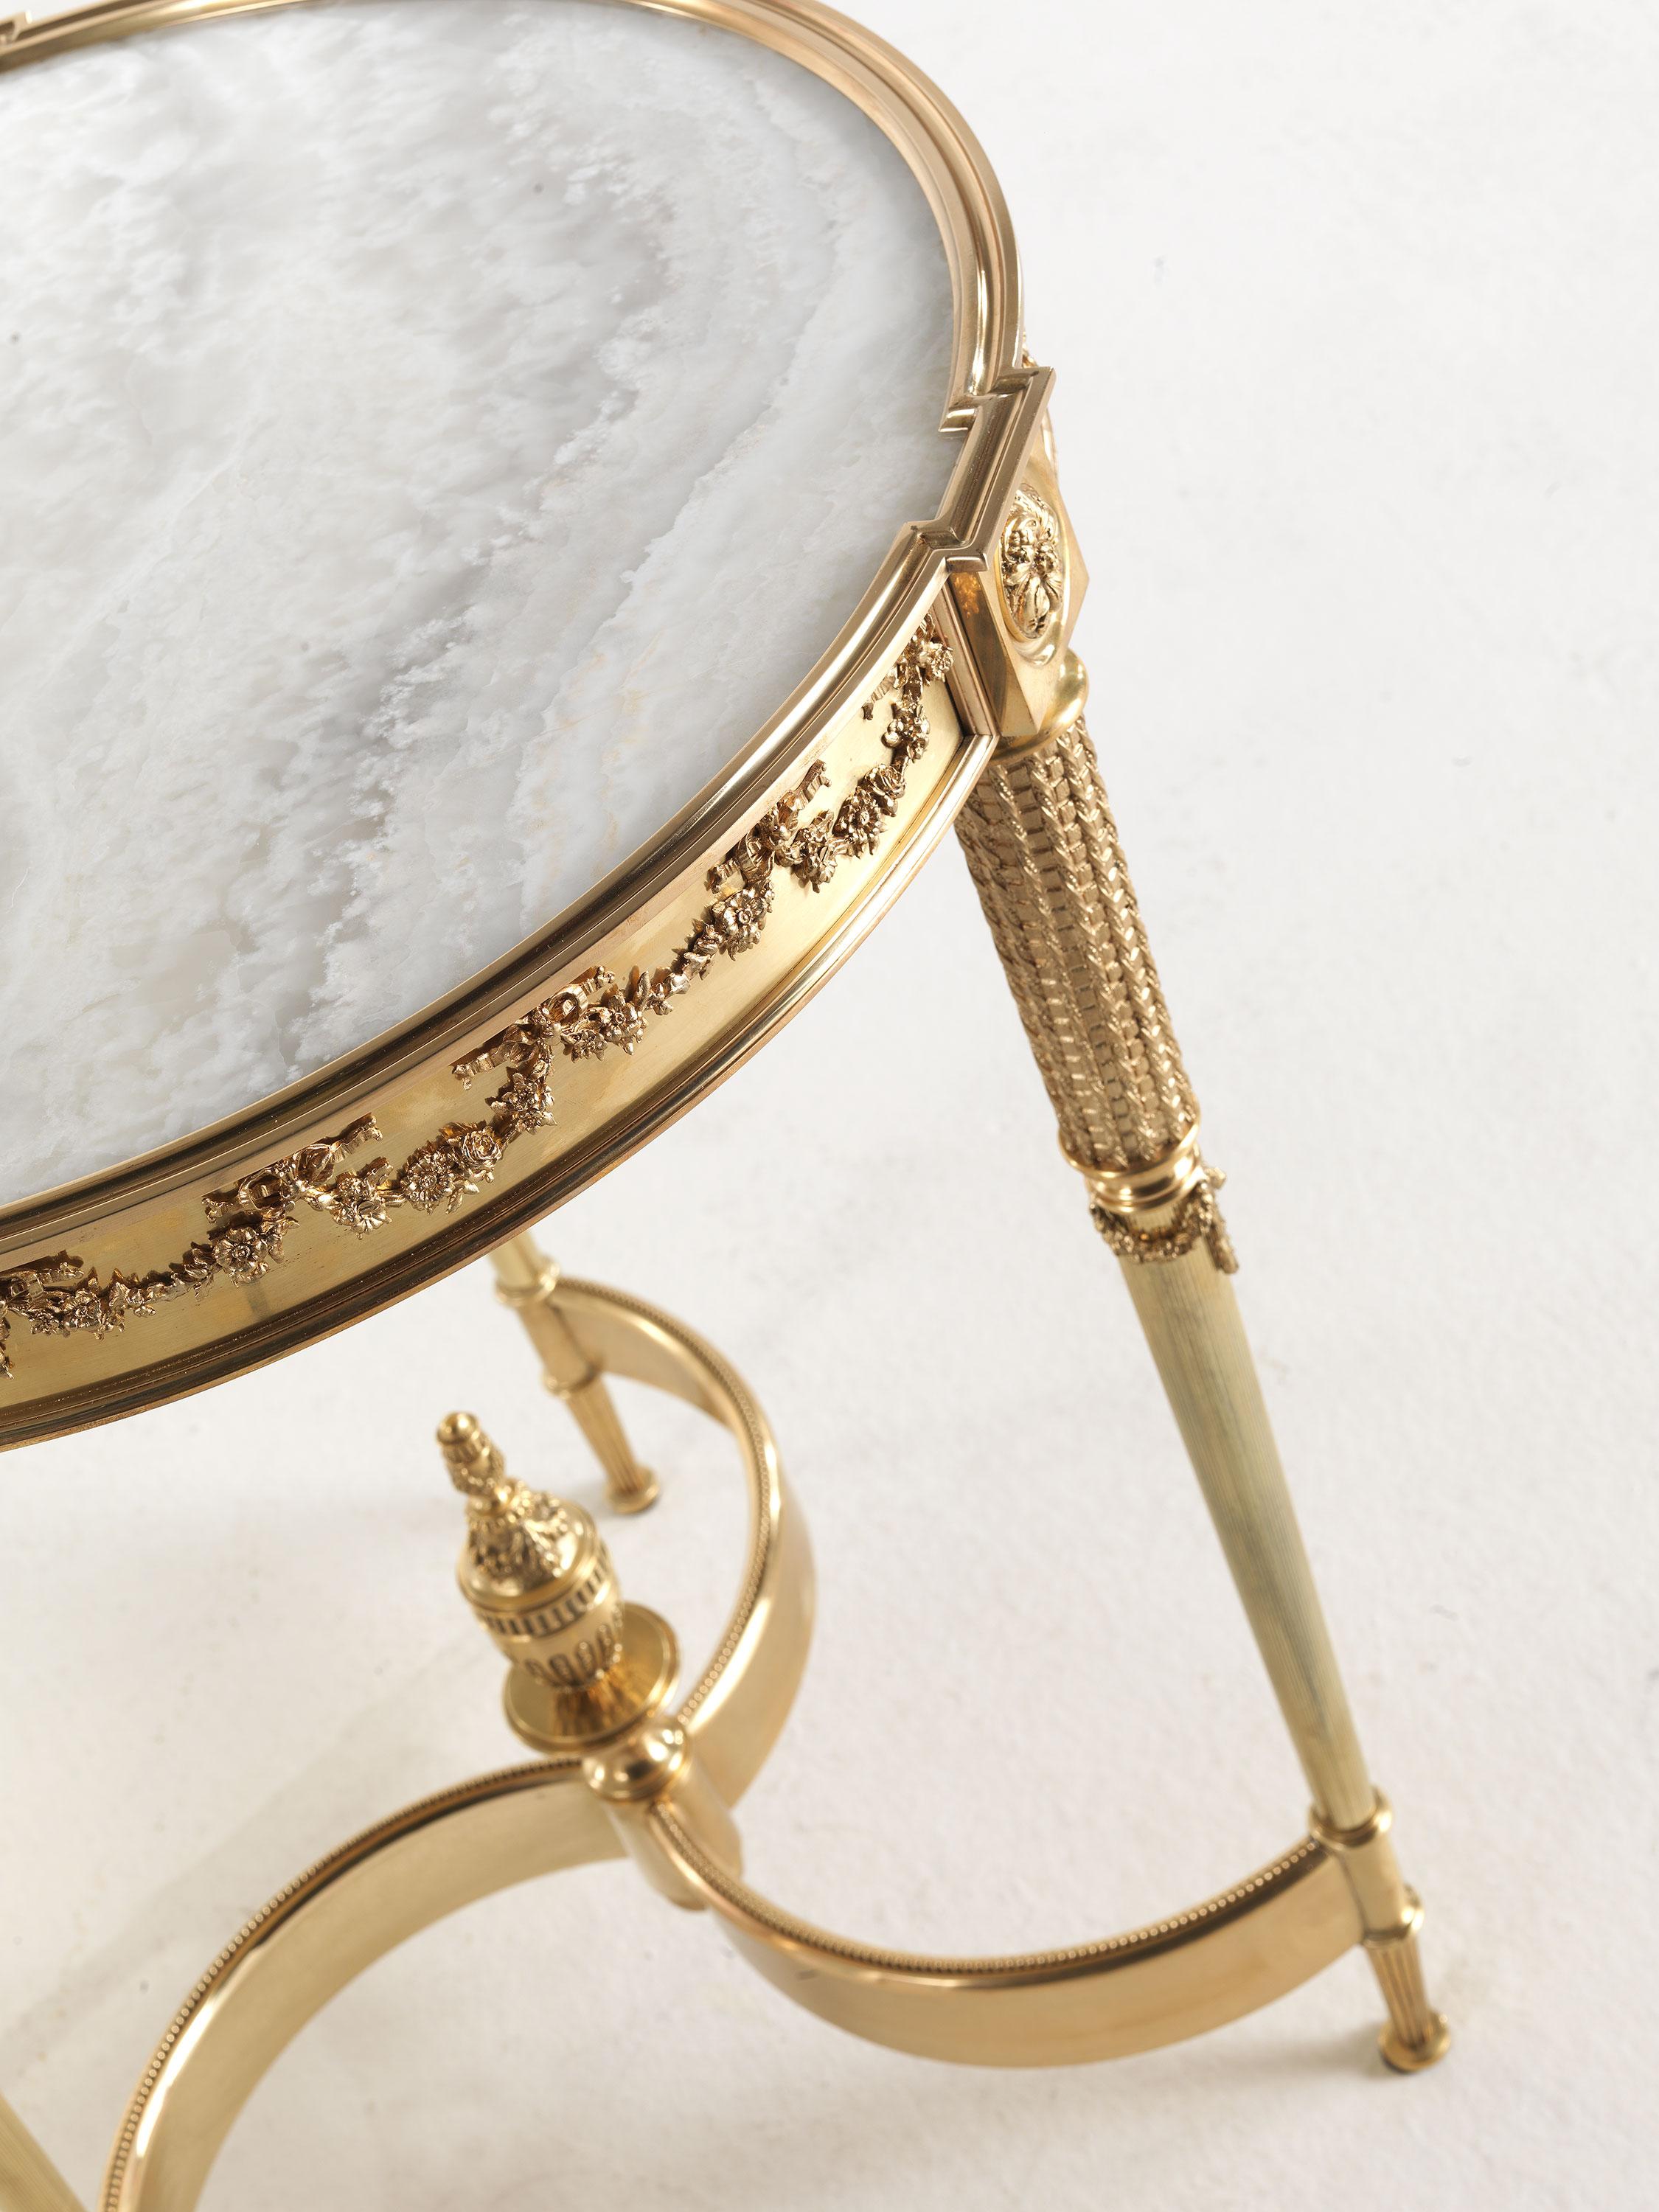 Pleasure is a line of furnishings characterized by an elegant and refined charm. This side table features brass legs with an antique finish and a cross that ends with a central decorative element, while the precious marble top completes the whole